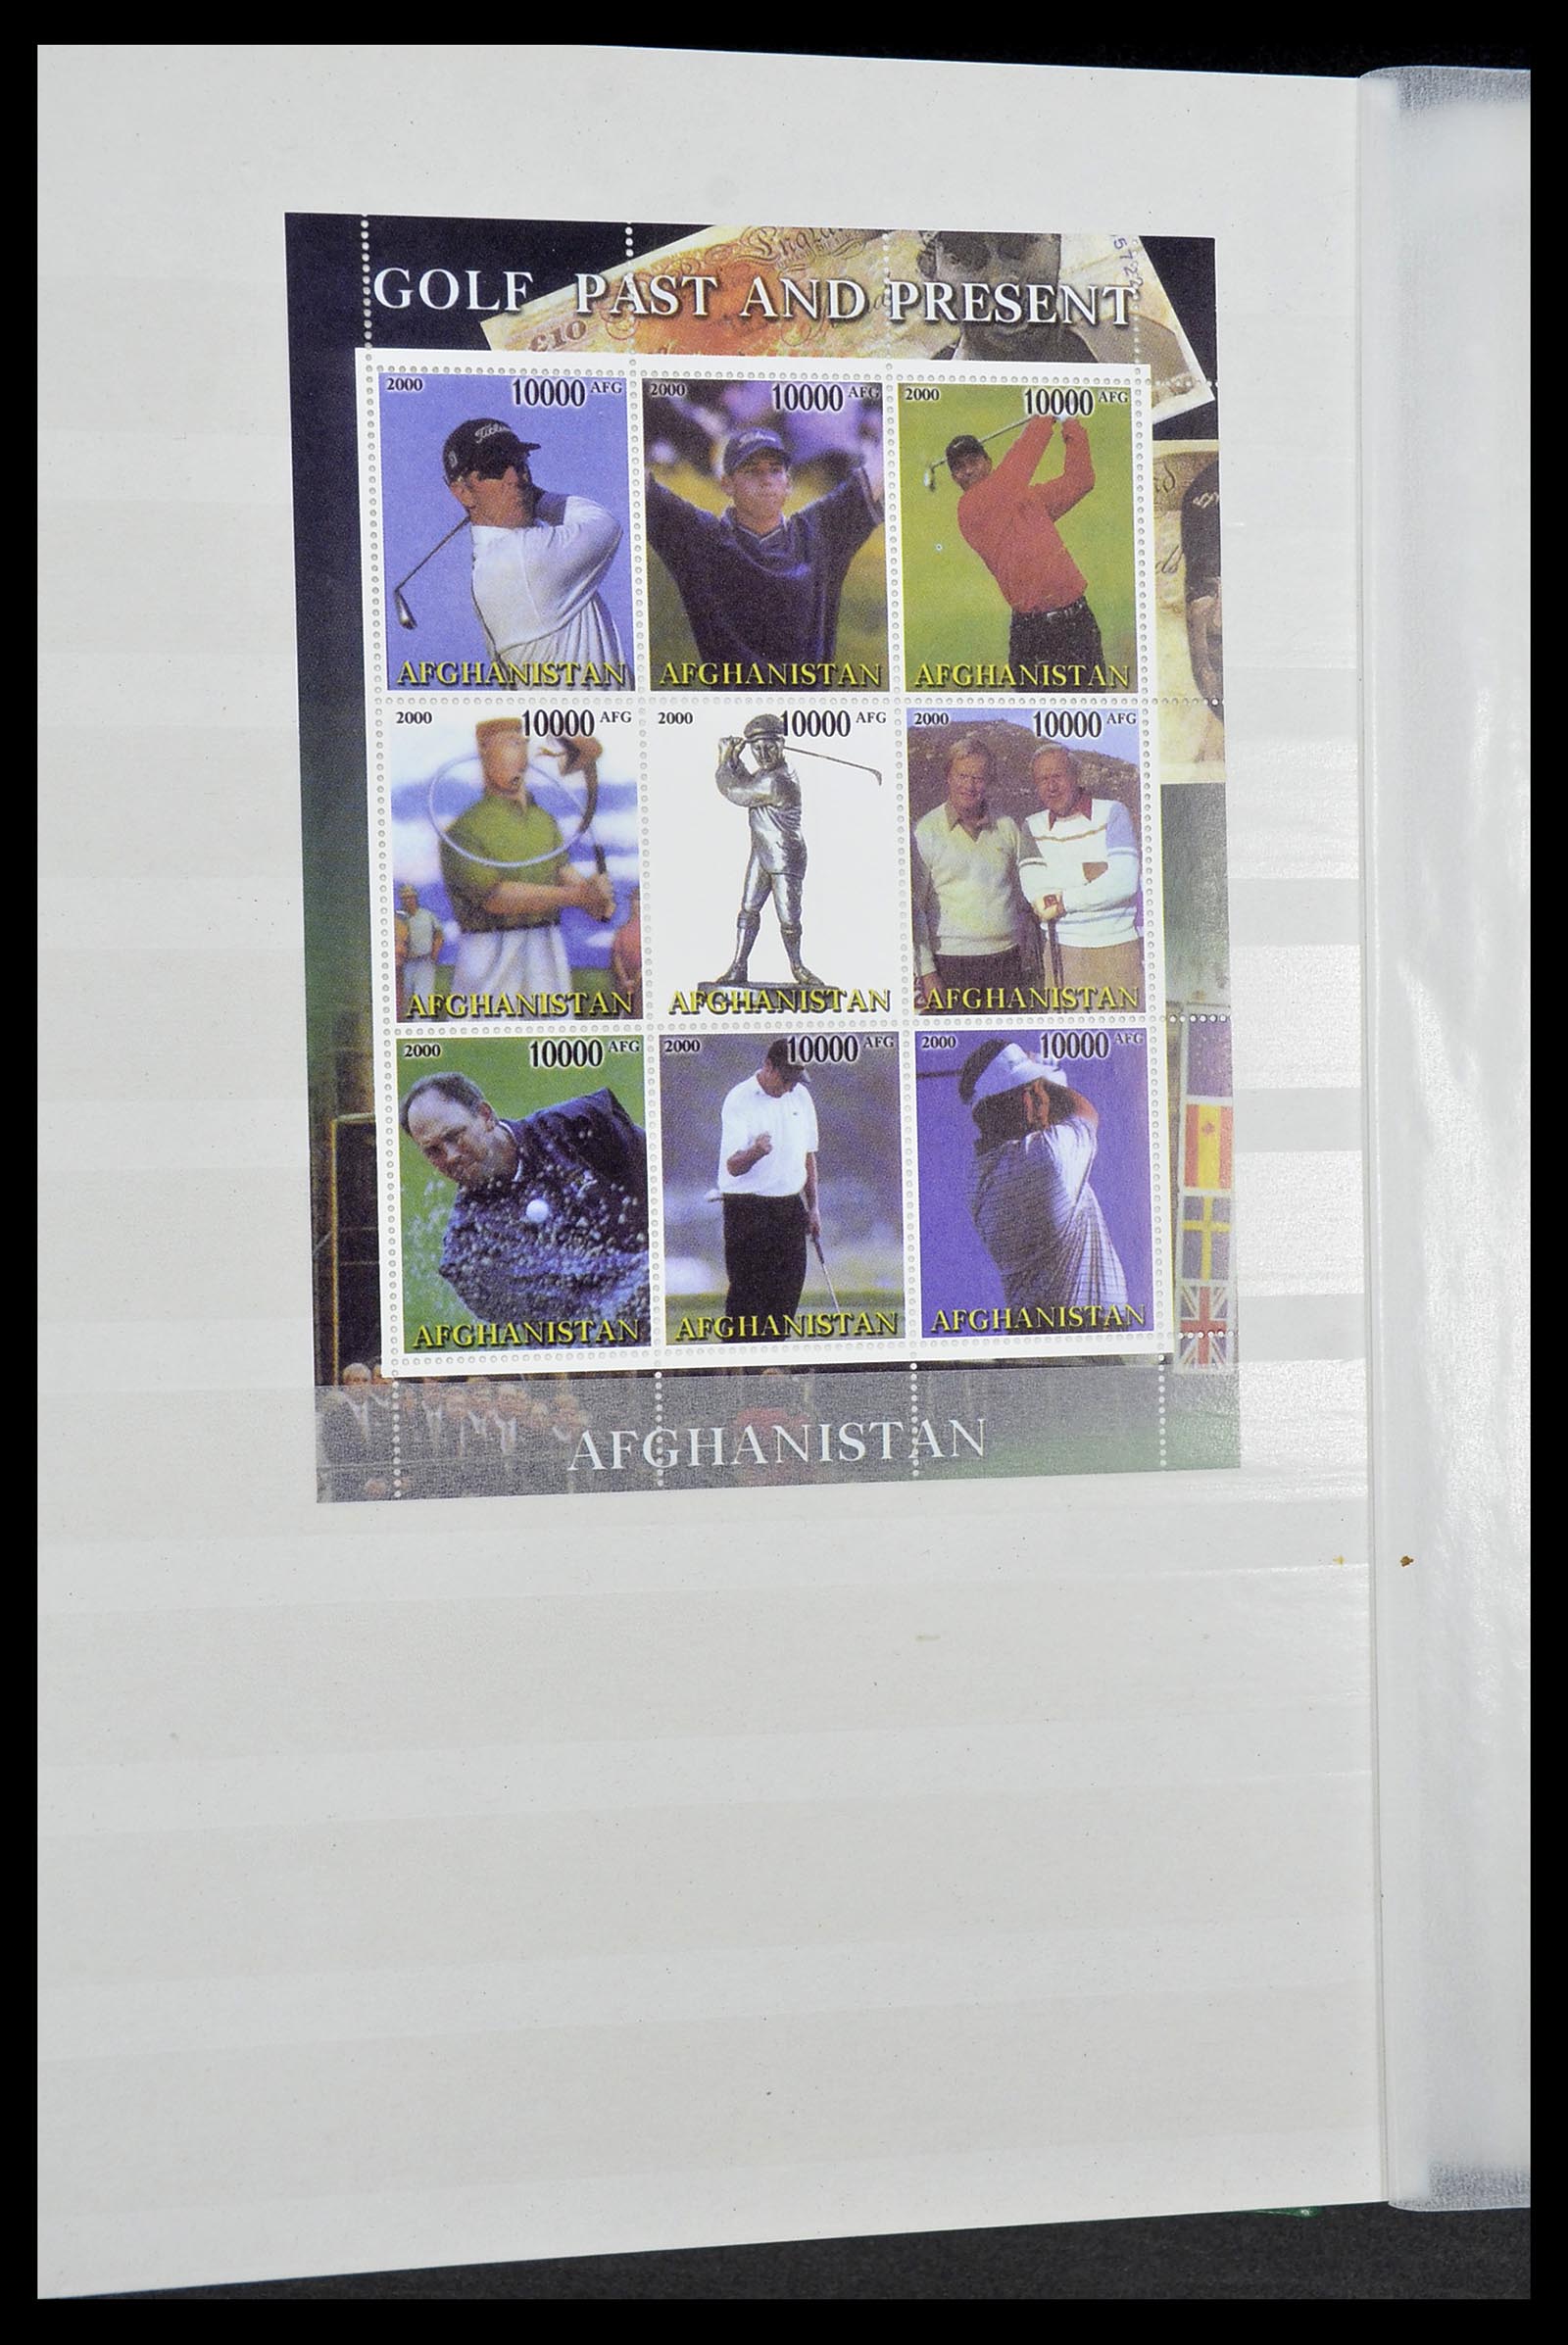 34425 006 - Stamp Collection 34425 Thematics Golf 1959-2012.